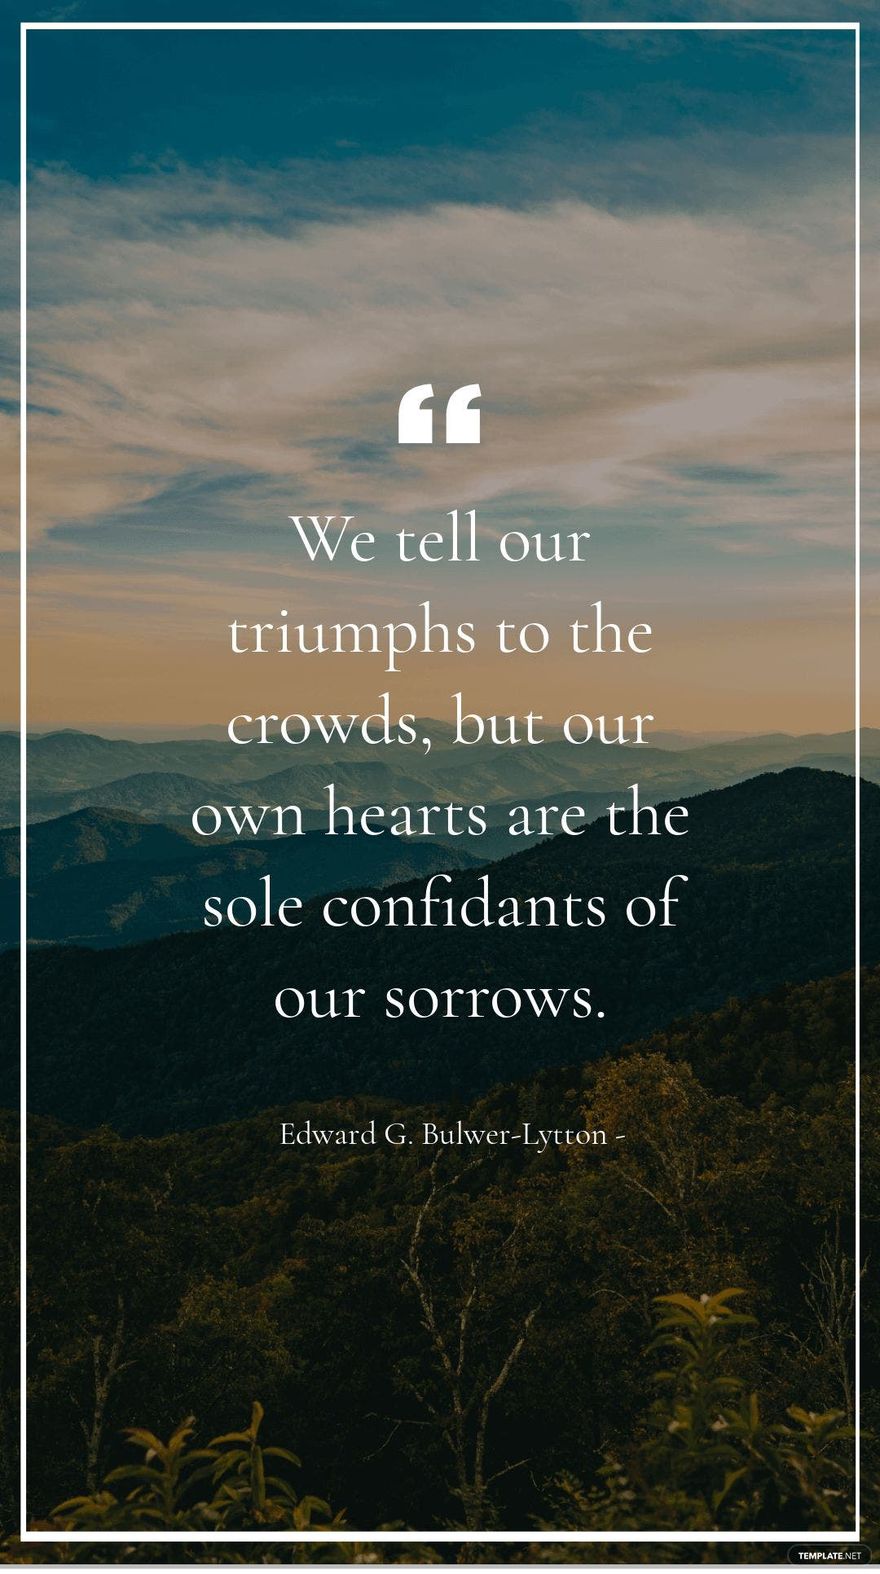 Edward G. Bulwer-Lytton - We tell our triumphs to the crowds, but our own hearts are the sole confidants of our sorrows.